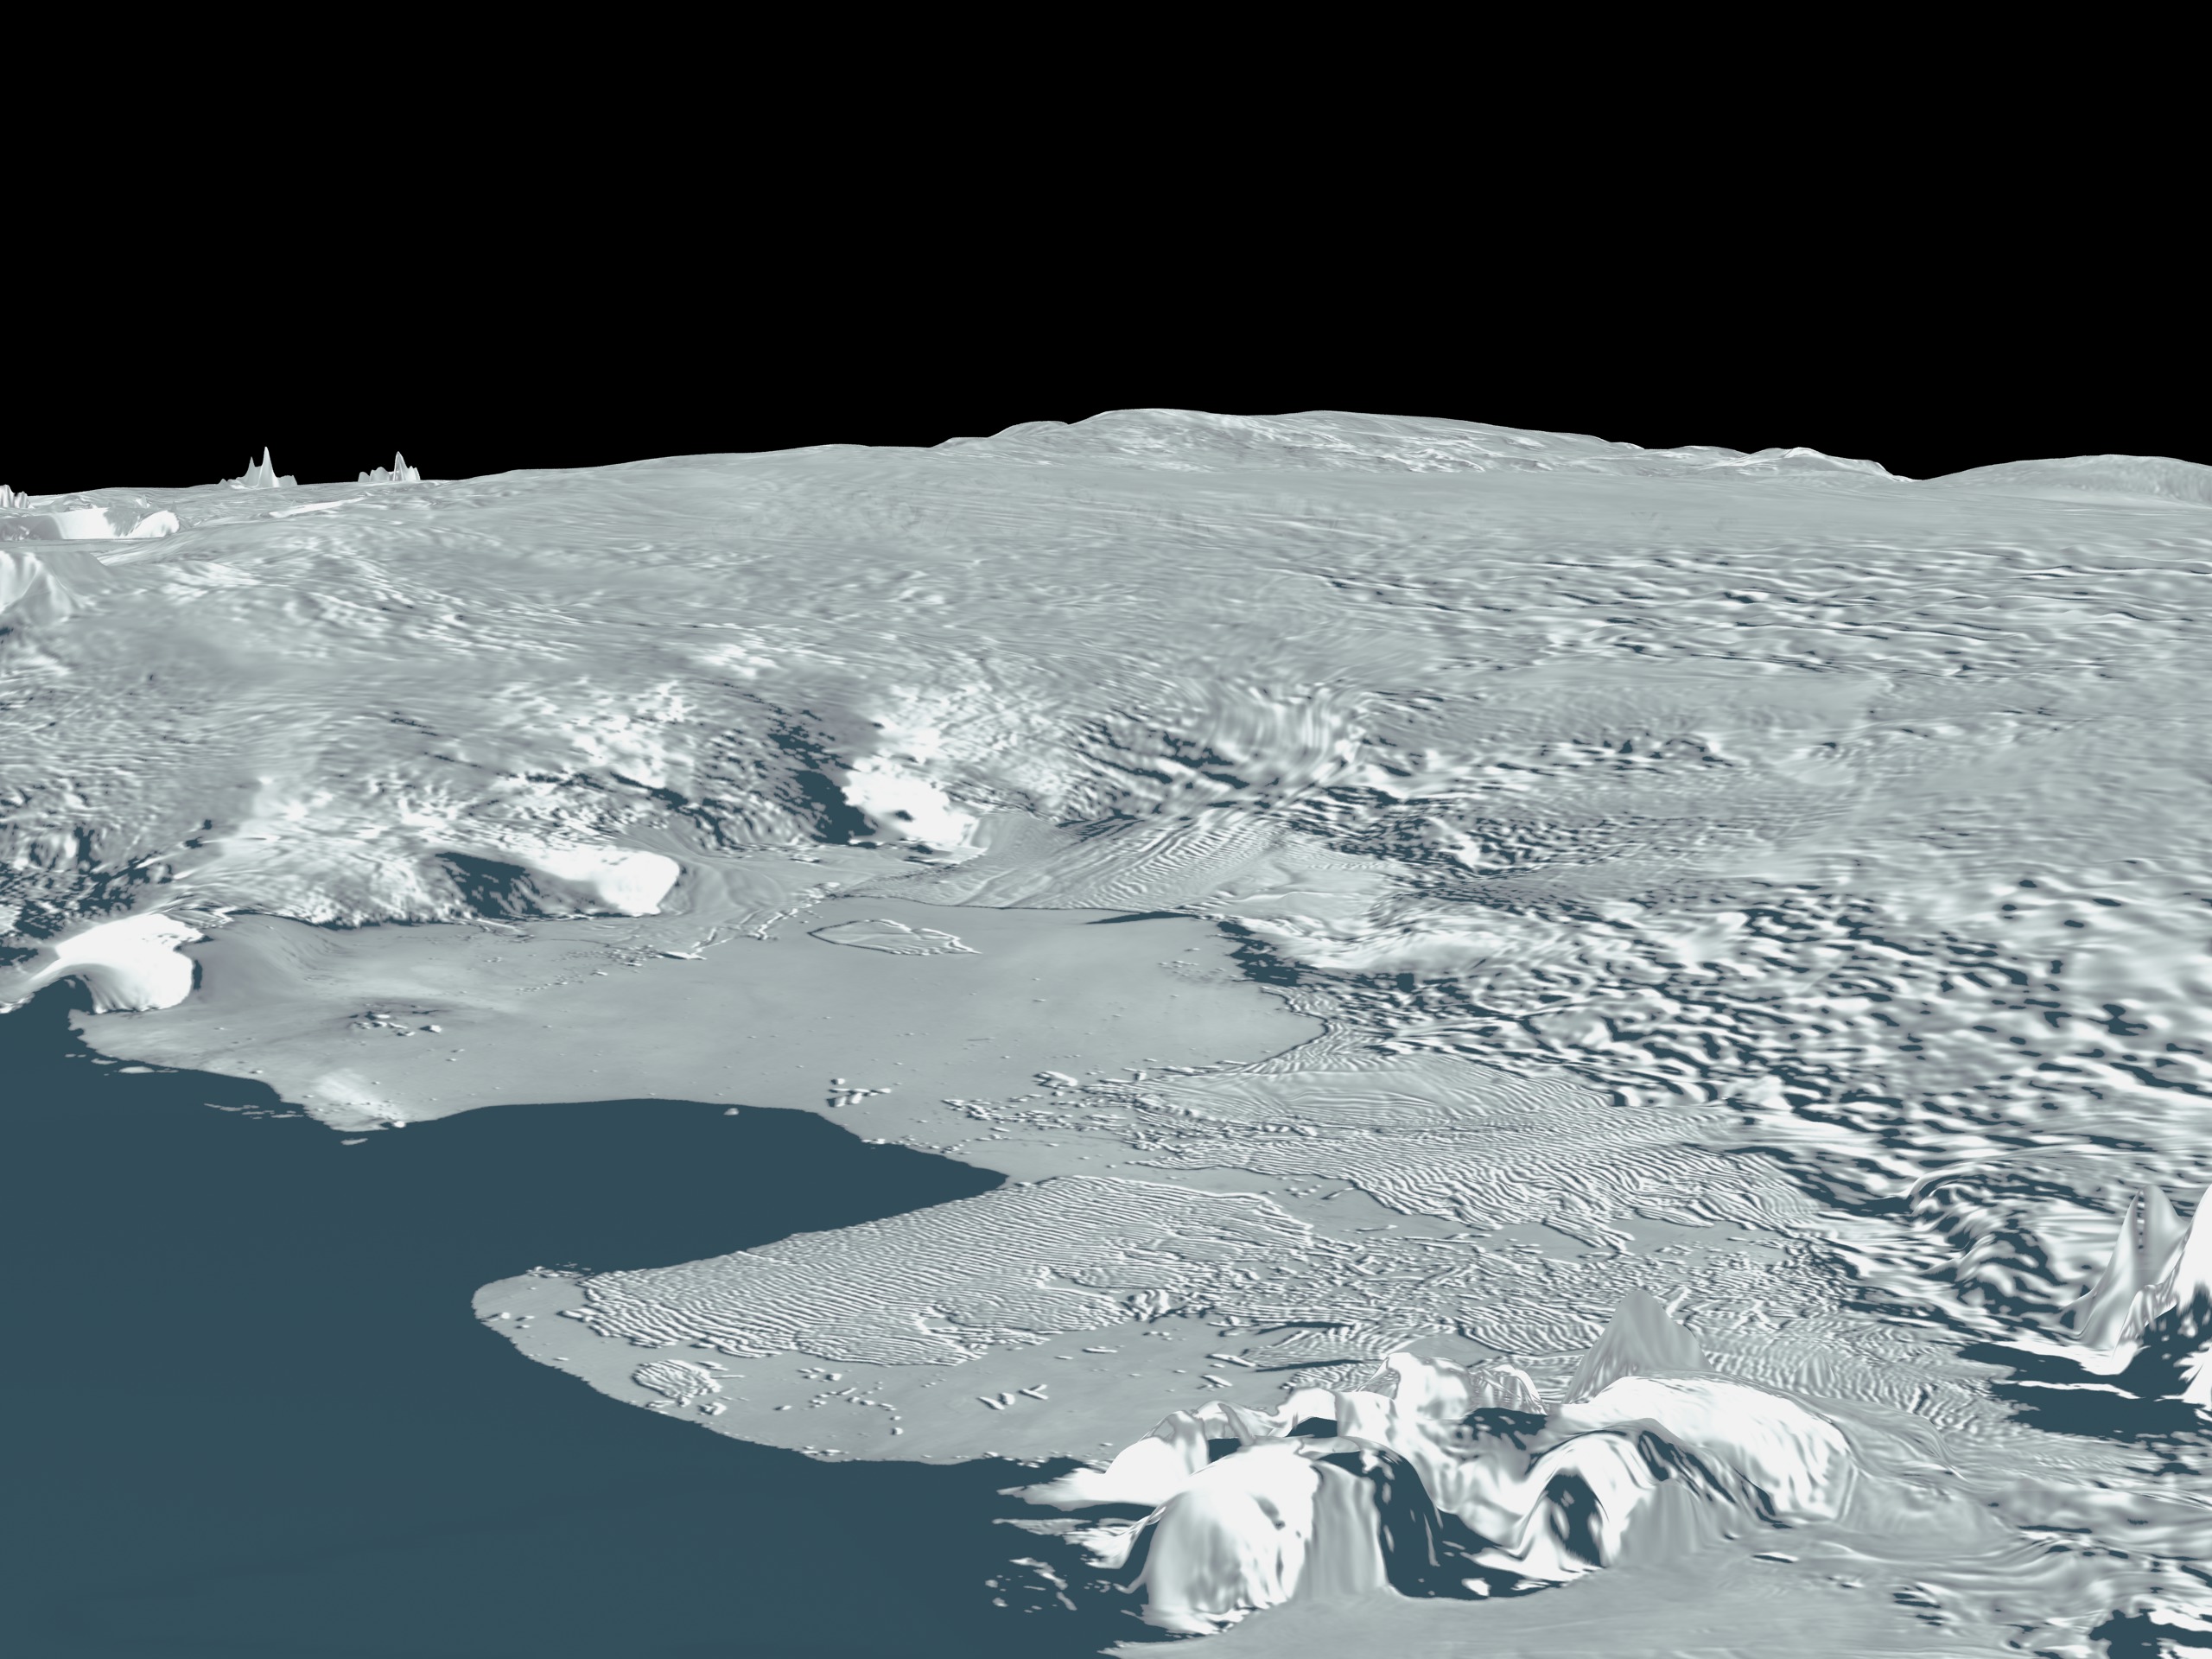 This animation flys over the Thwaites Glacier exposing the line of grounded icebergs and into Pine Island Bay to view the Pine Island Glacier. 